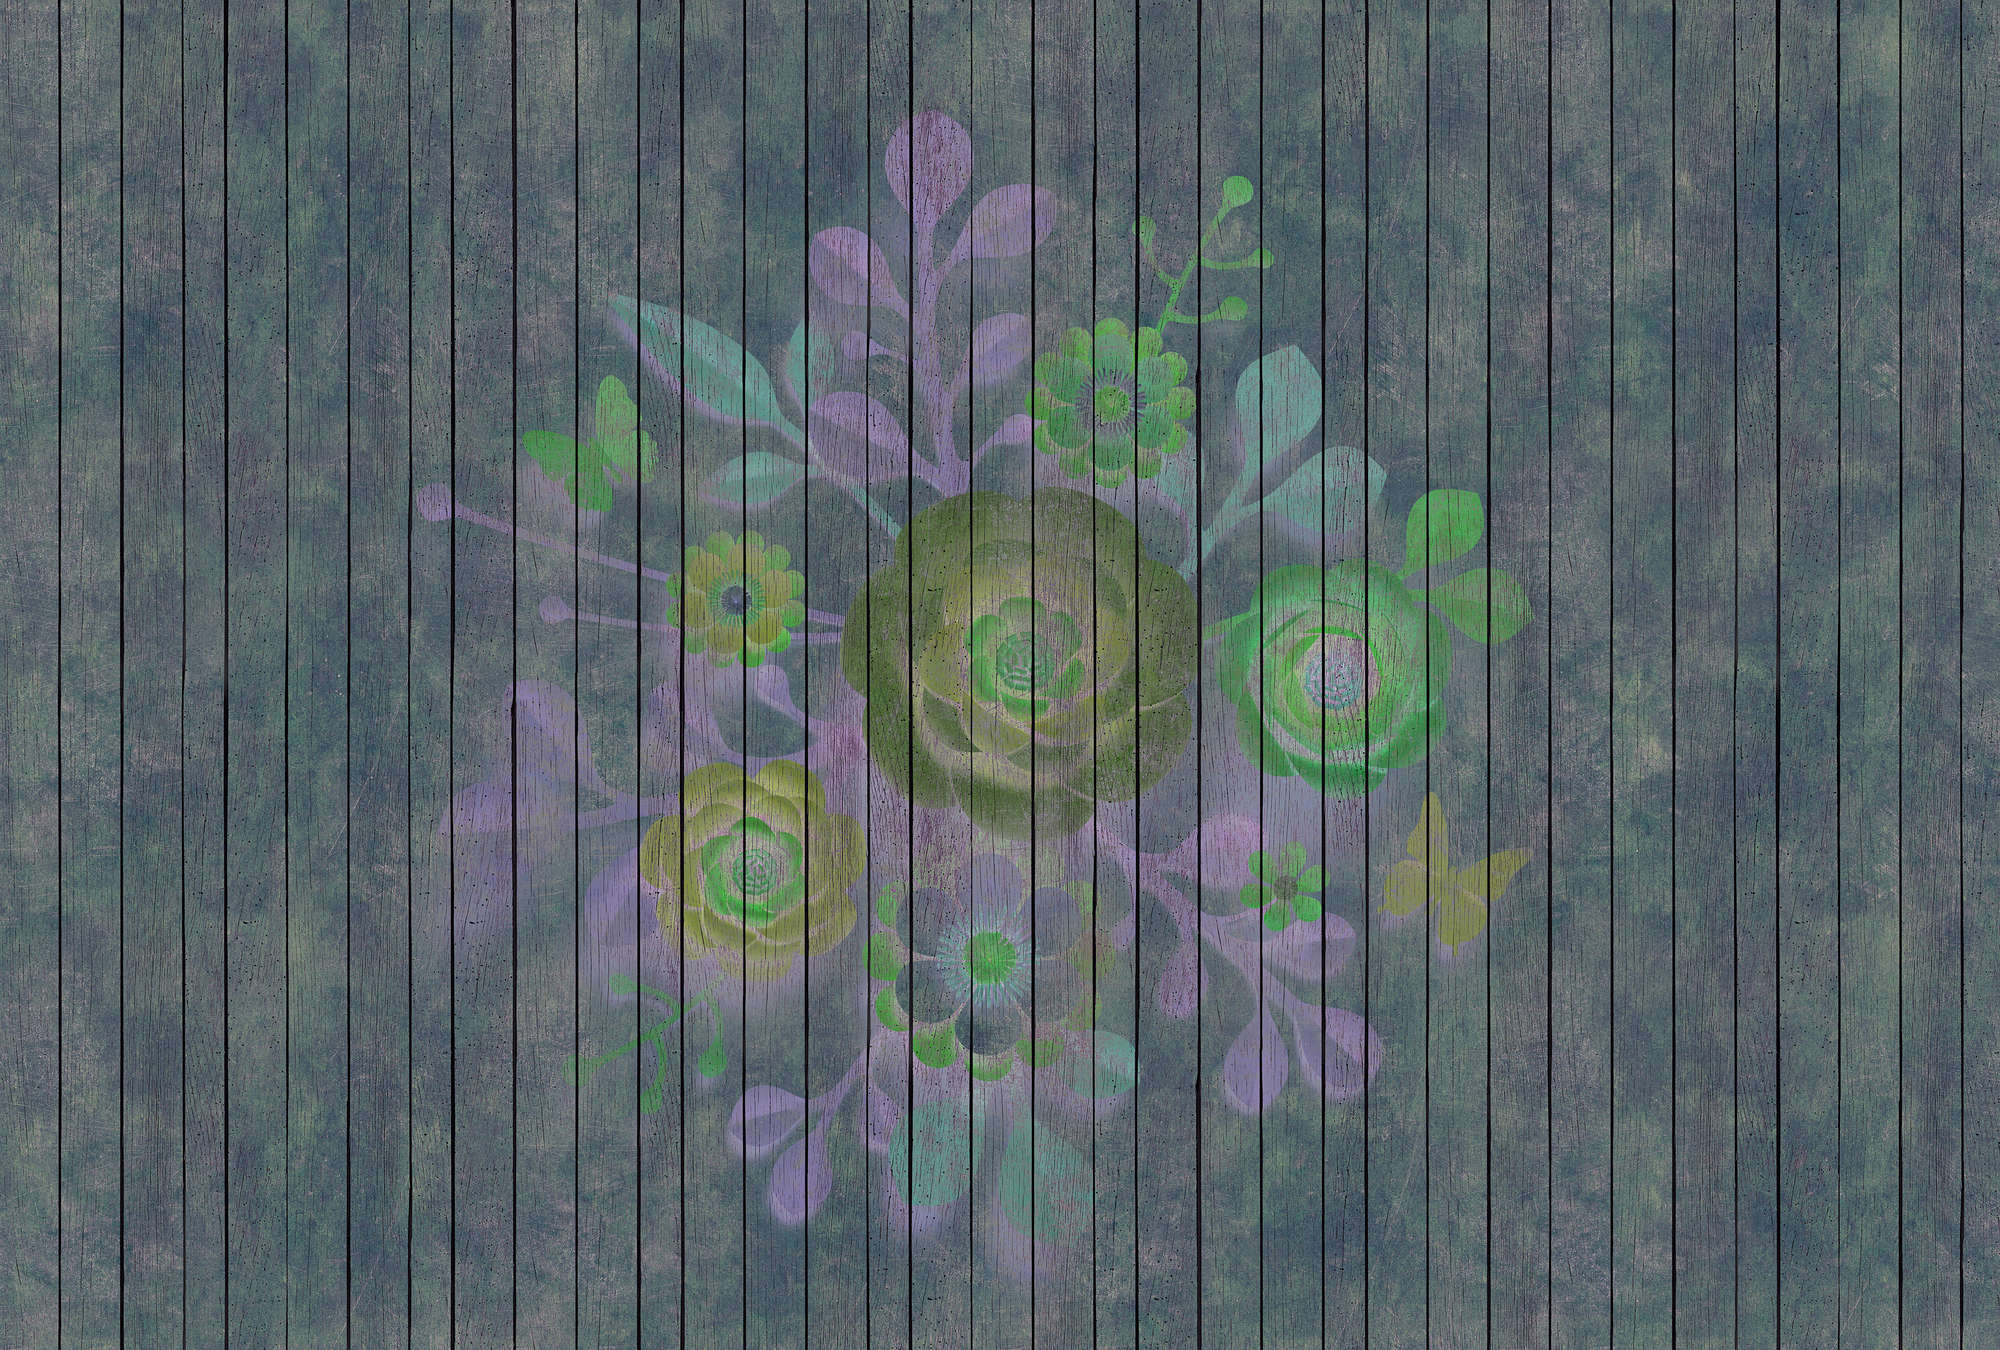             Spray bouquet 2 - Photo wallpaper in wood panel structure with flowers on board wall - Blue, Green | Structure non-woven
        